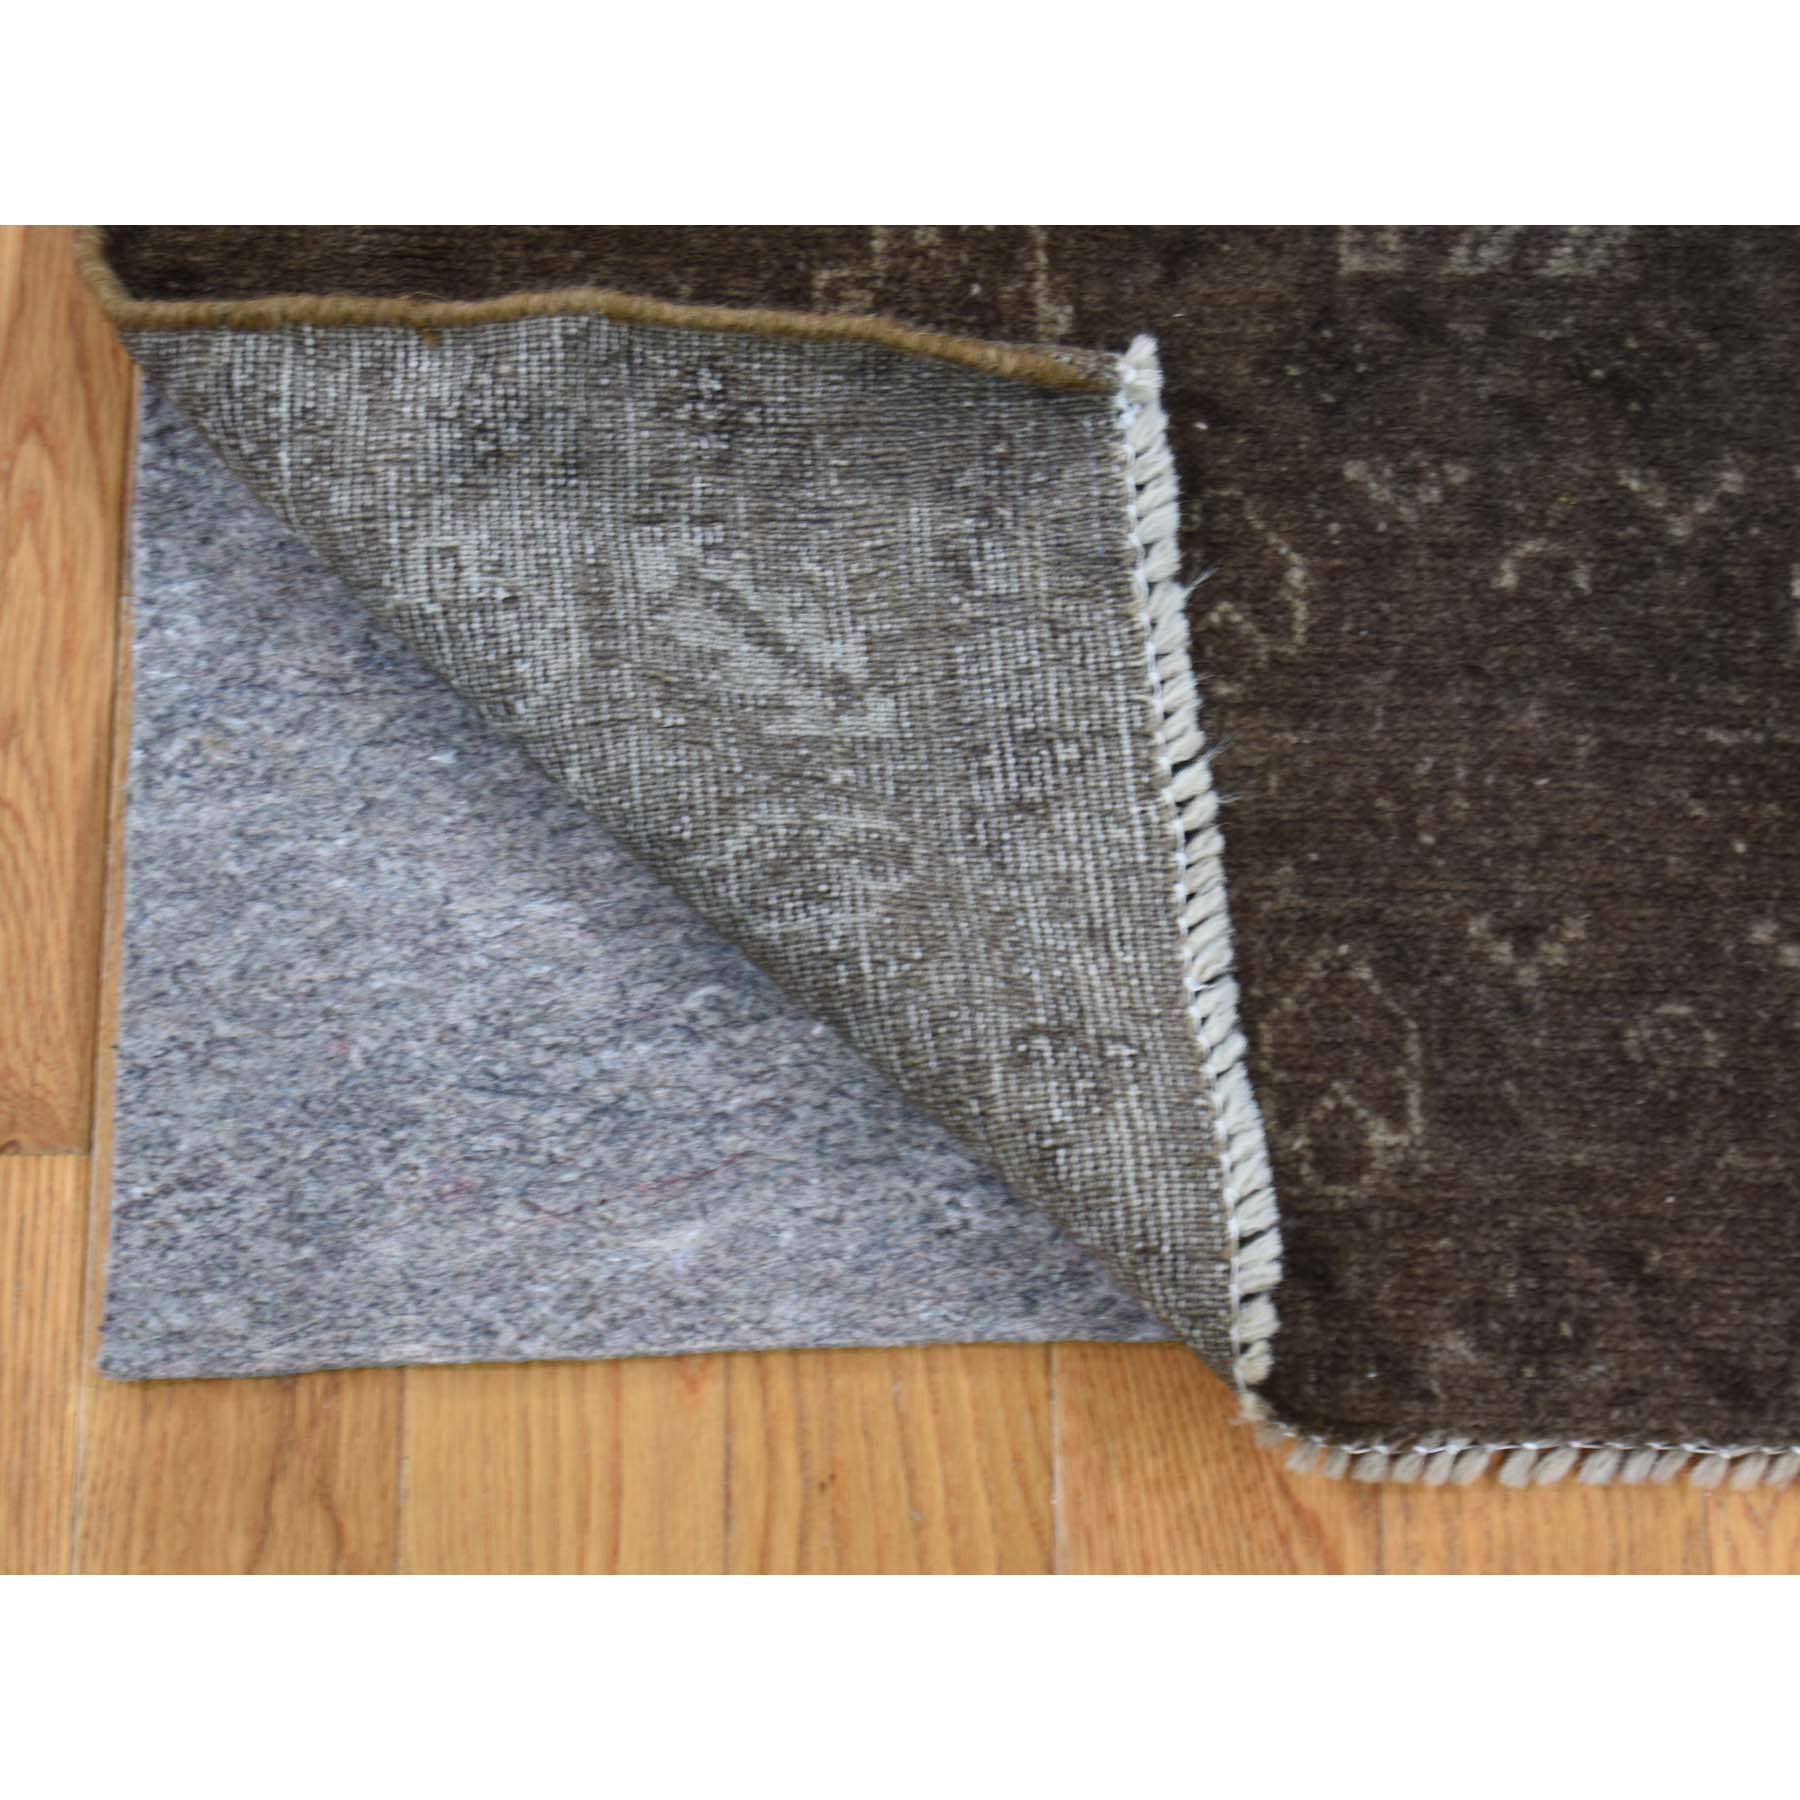 4-x7- Pure Wool Vintage Afghan Baluch Silver Wash Hand-Knotted Rug 